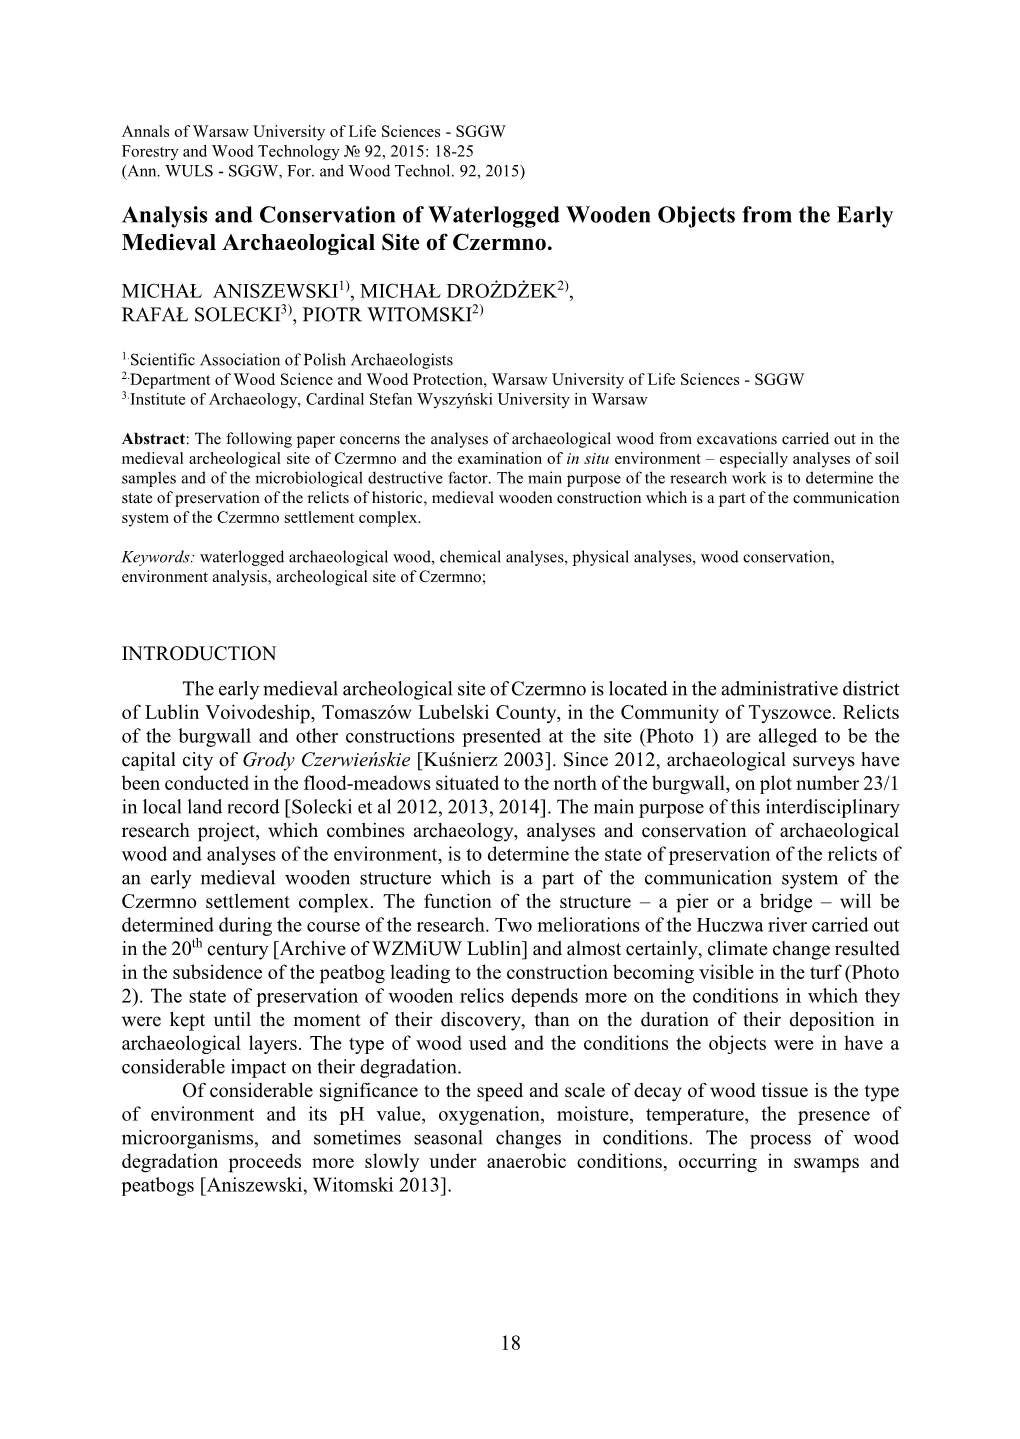 Analysis and Conservation of Waterlogged Wooden Objects from the Early Medieval Archaeological Site of Czermno